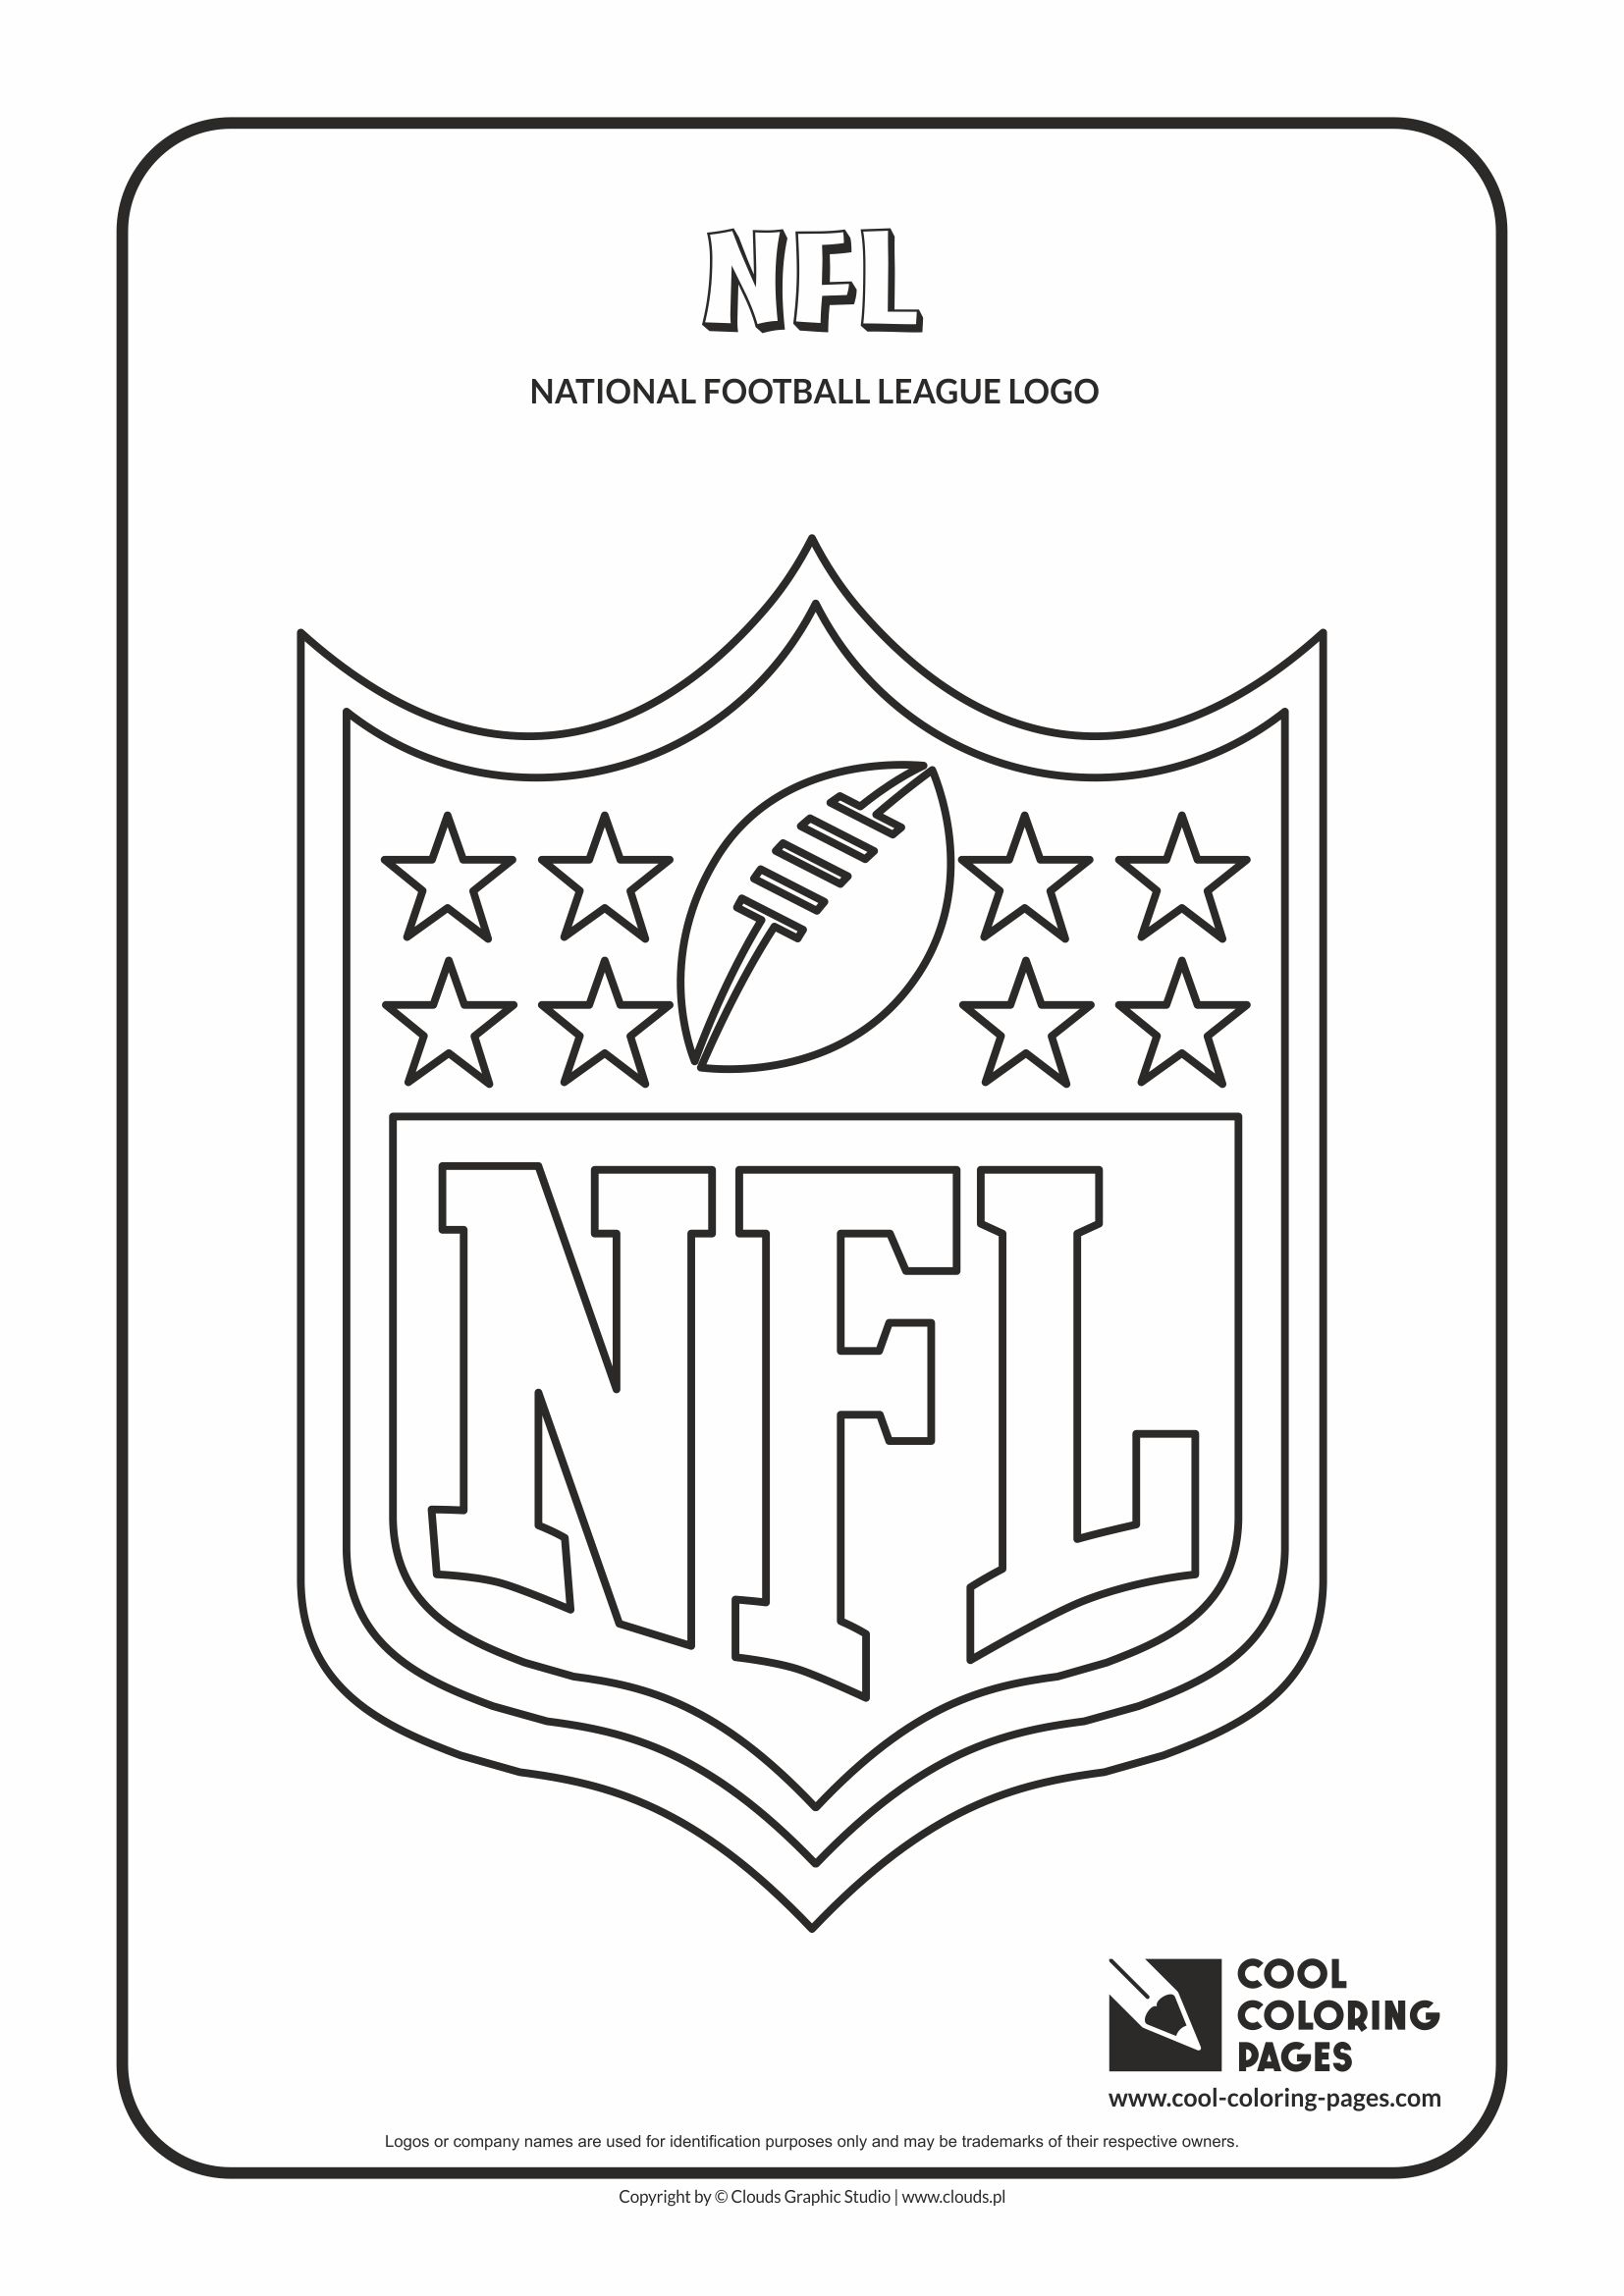 Download Cool Coloring Pages NFL teams logos coloring pages - Cool ...